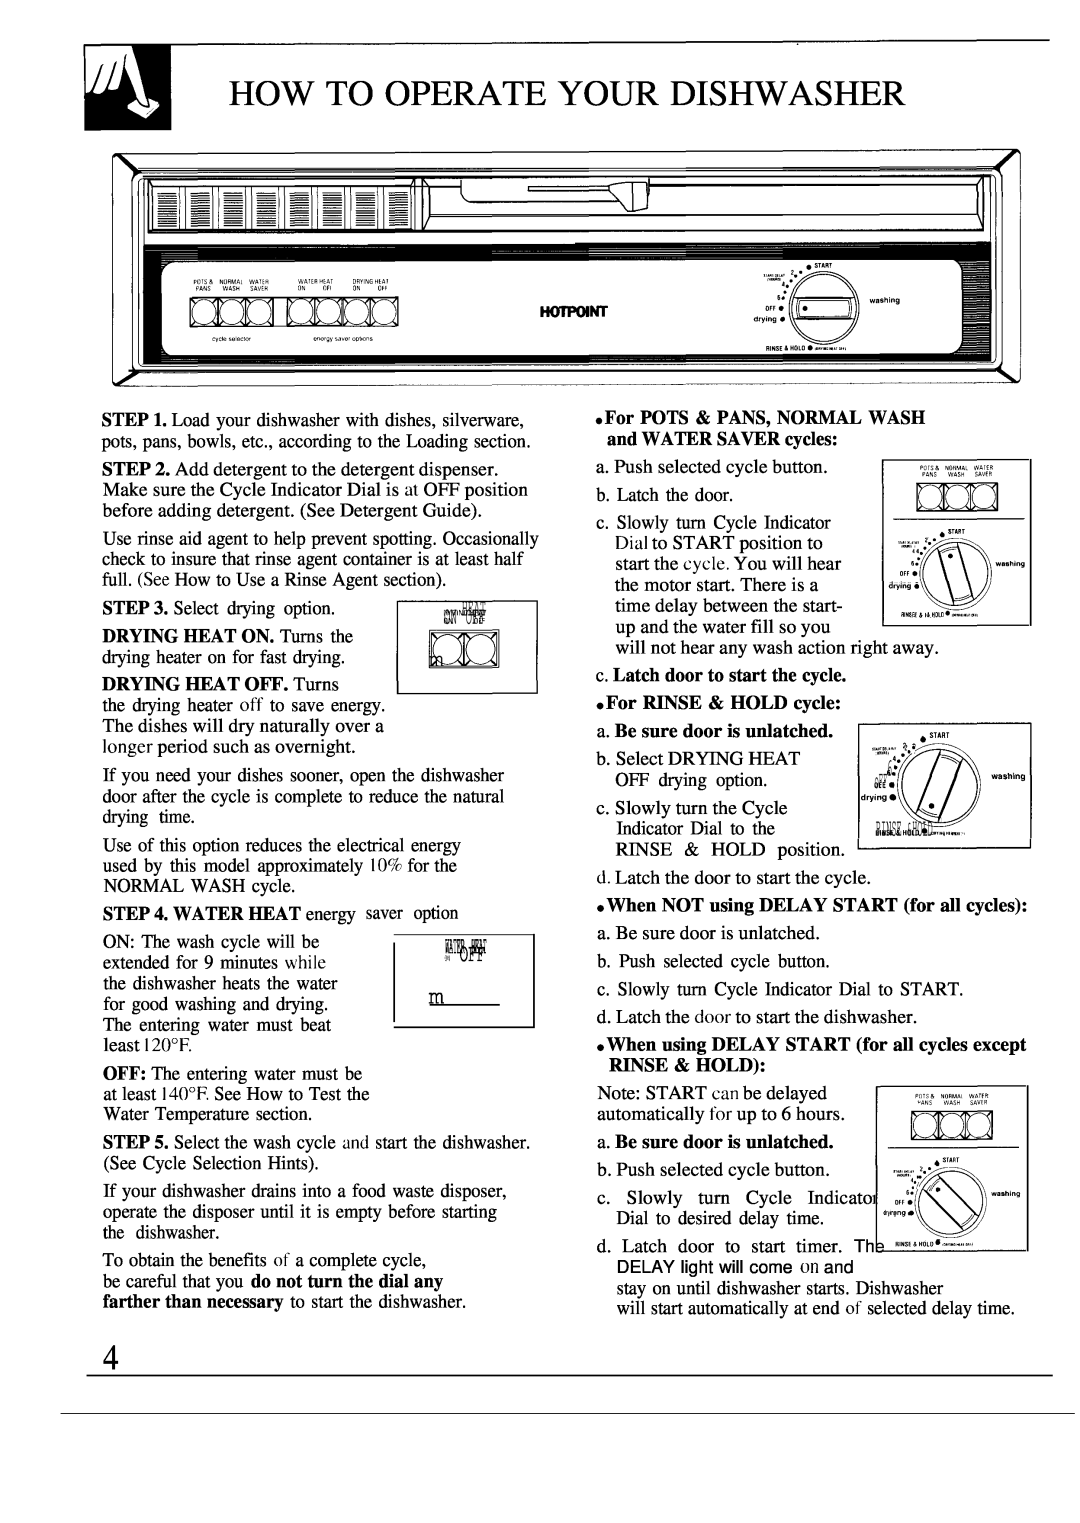 Hotpoint HDA750 How To Operate Your Dishwasher, ON OFF m, Drying Heat, DRYING HEAT OFF. Turns, For RINSE & HOLD cycle 